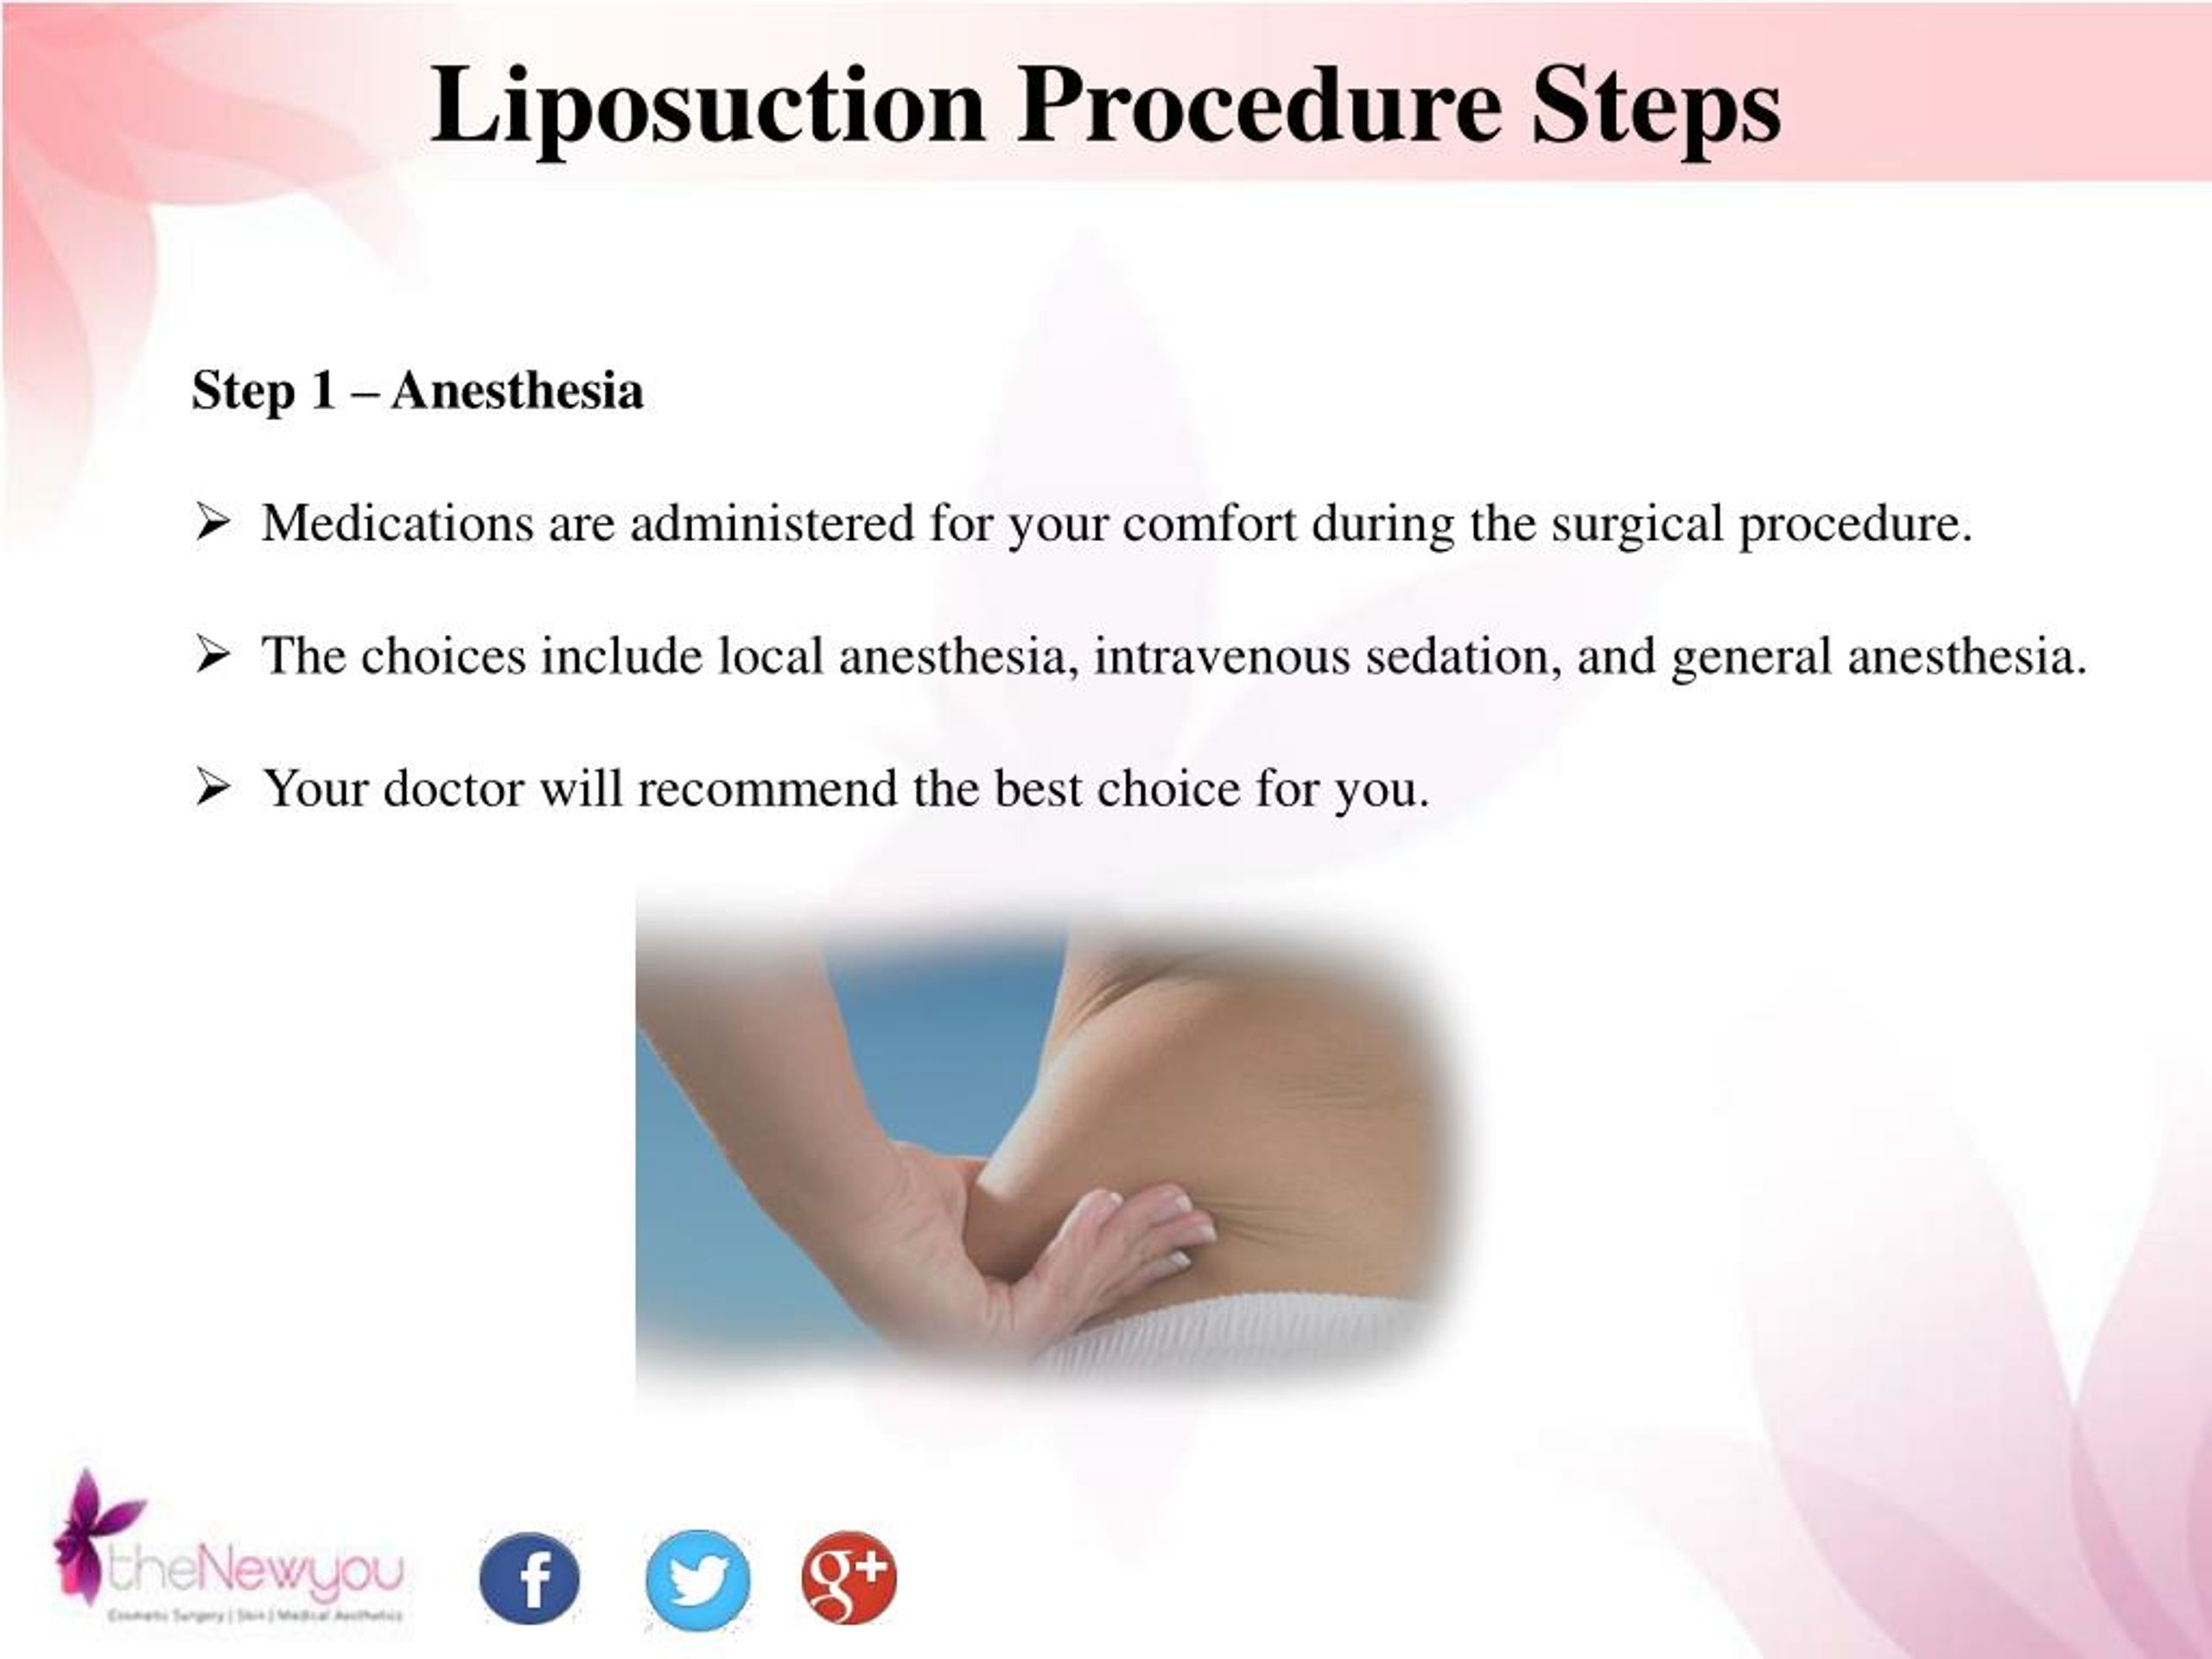 PPT Liposuction Fat Removal Surgery for Men and Women